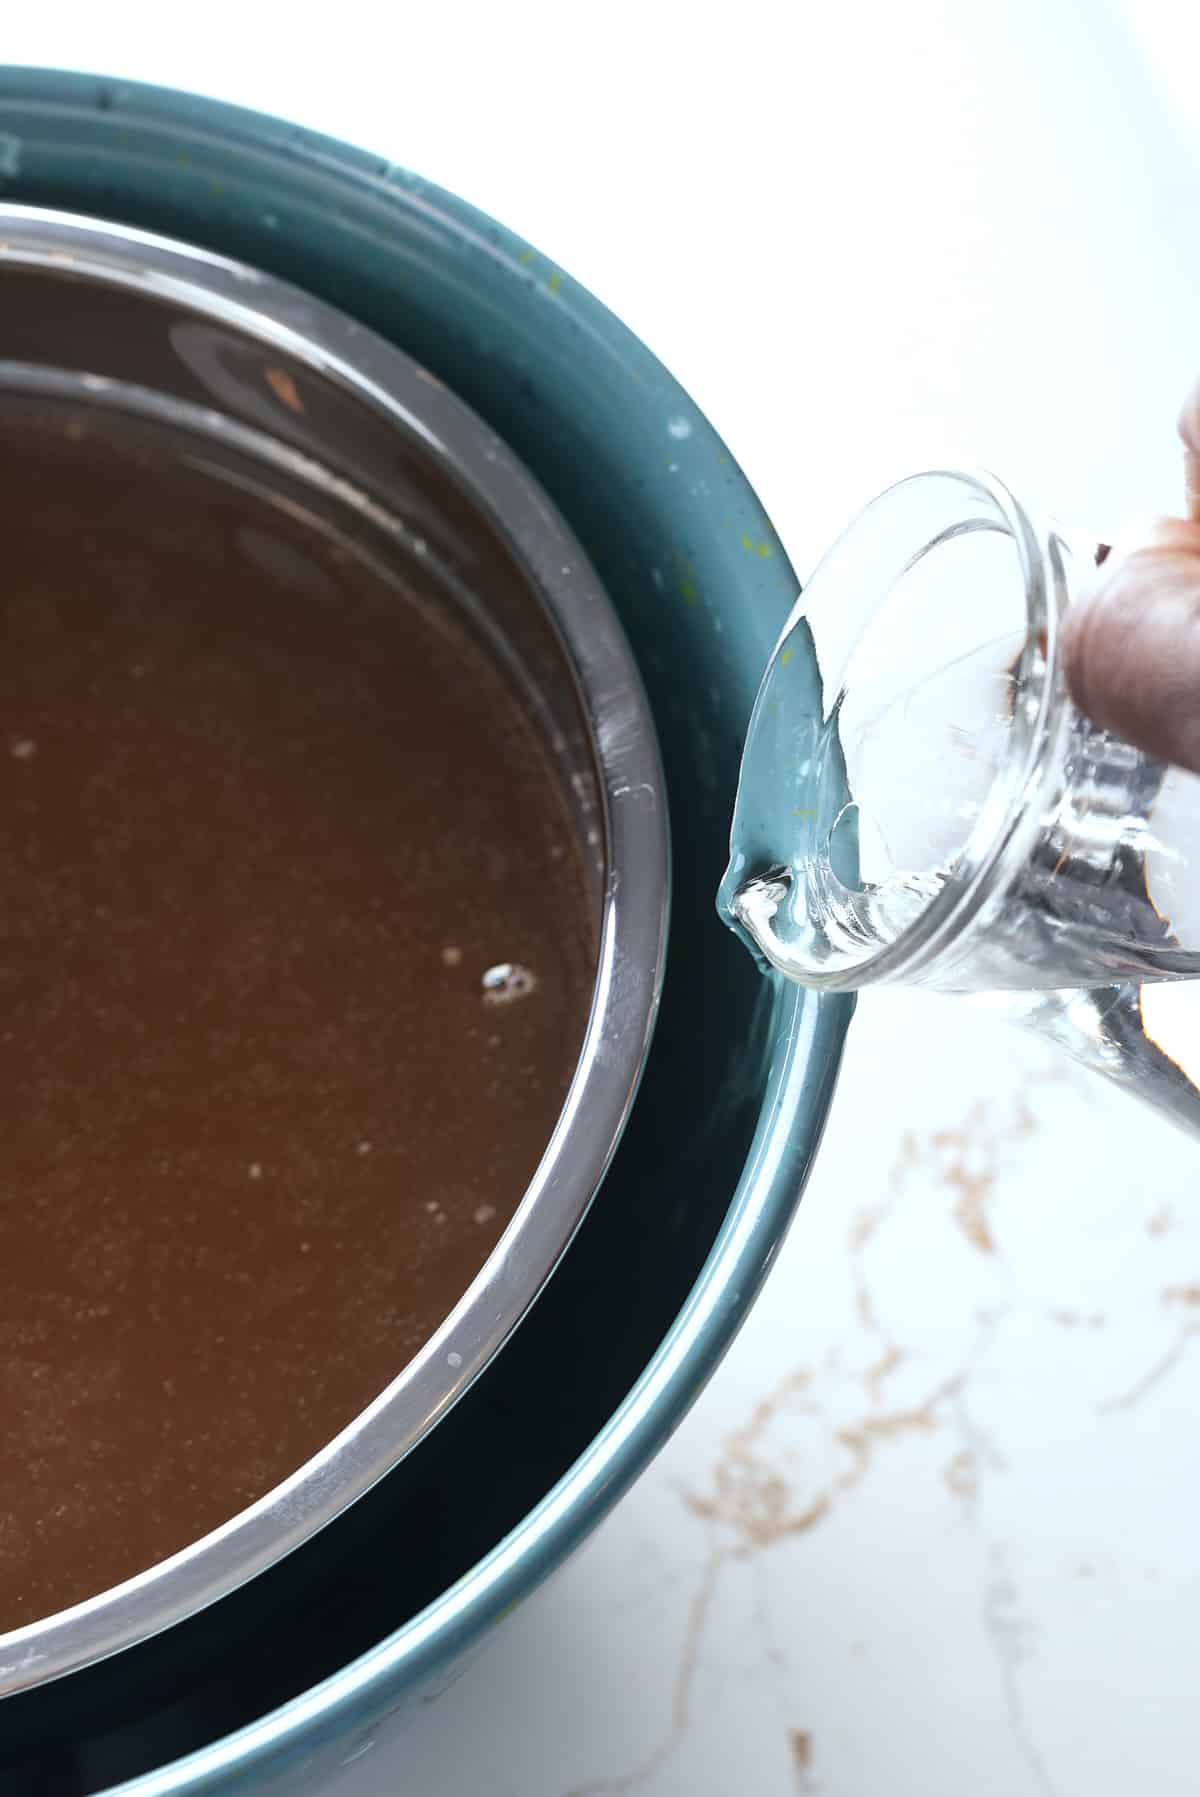 A pot of turkey stock being set inside a bowl of ice cubes to cool, with a jug of ice cold water being poured down between the 2 bowls.